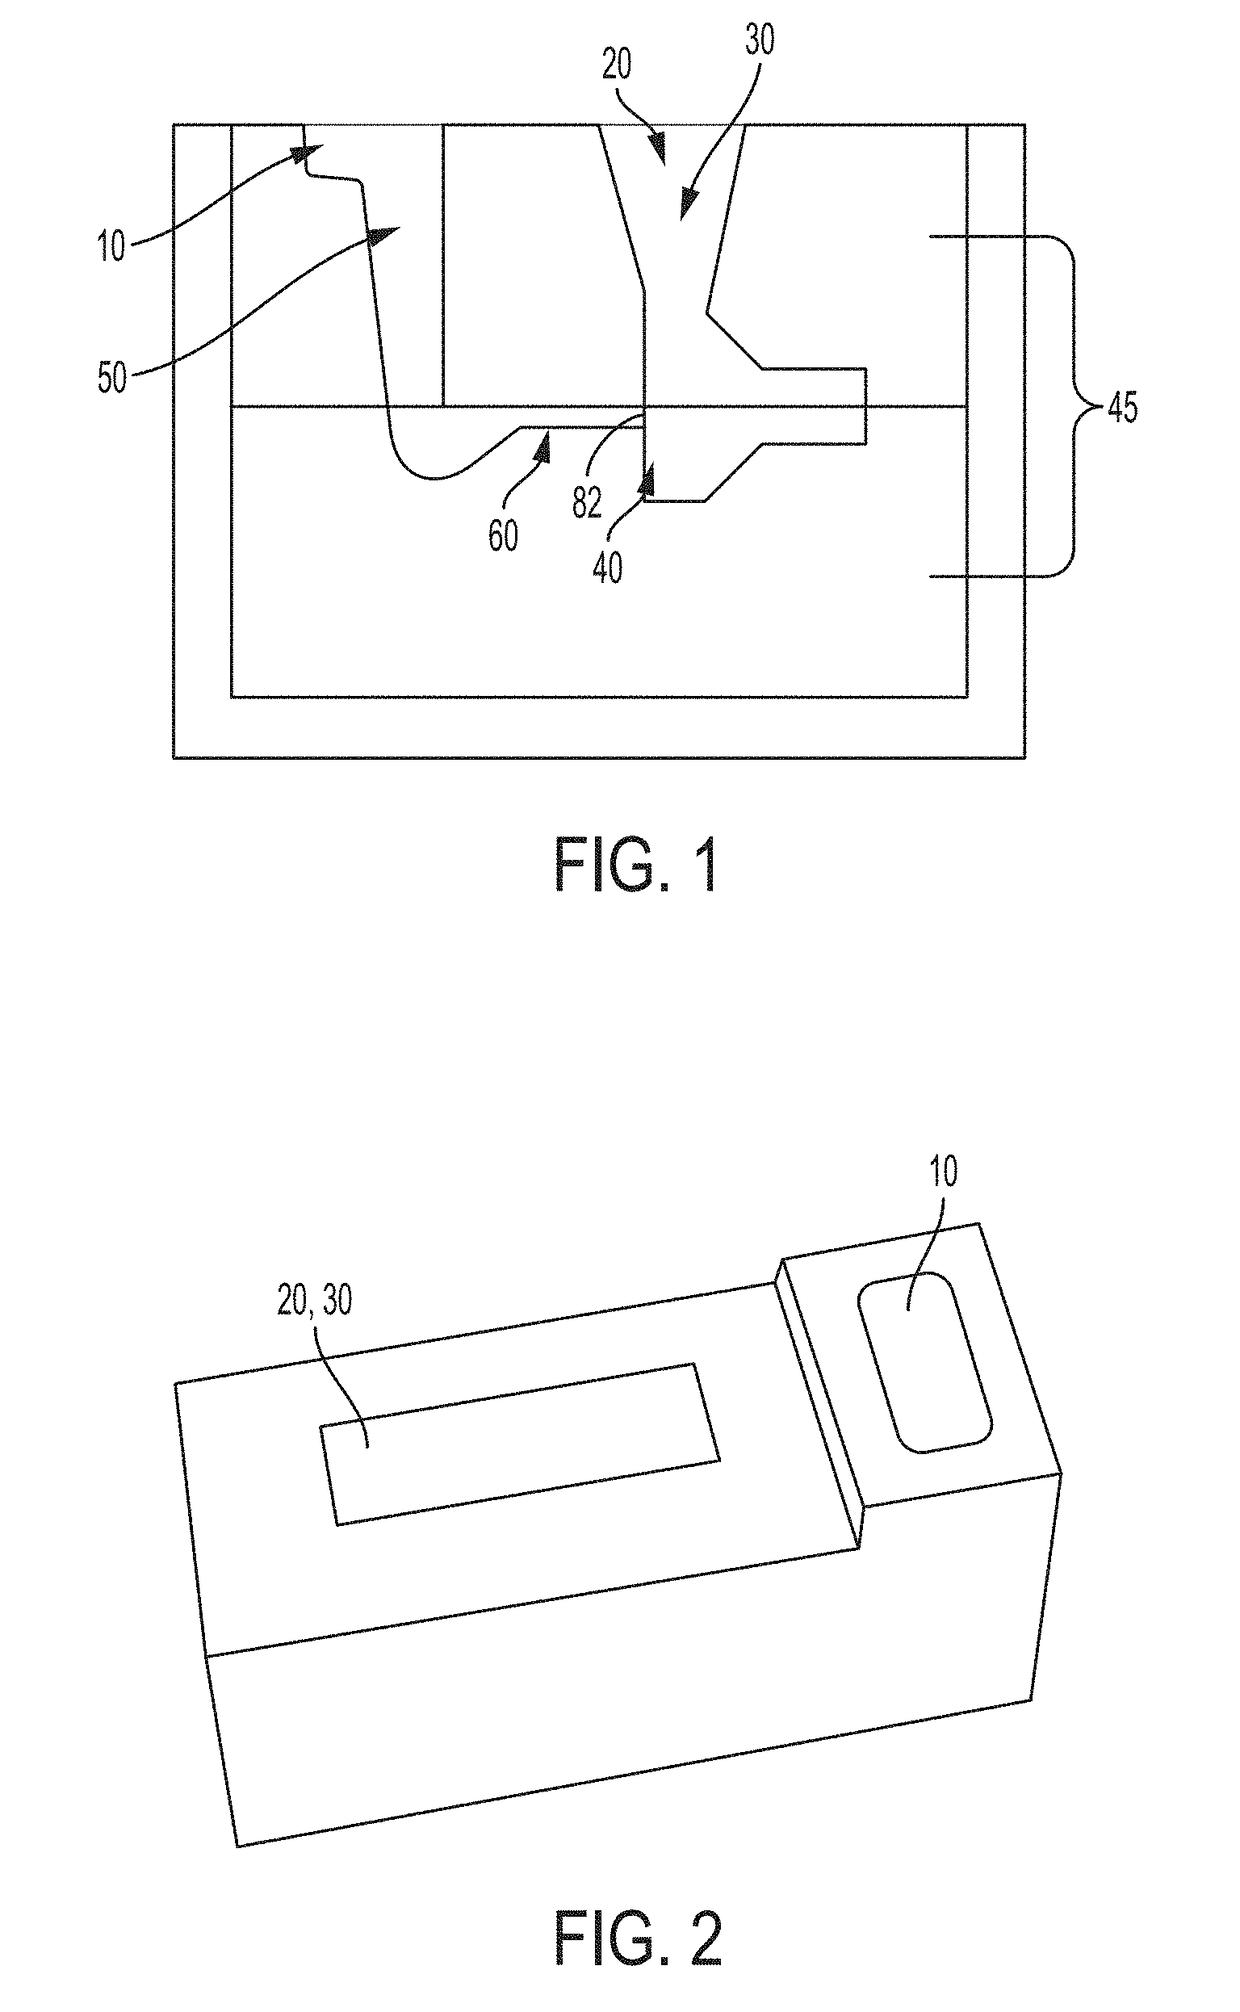 Method to improve riser feedability for semi-permanent mold casting of cylinder heads